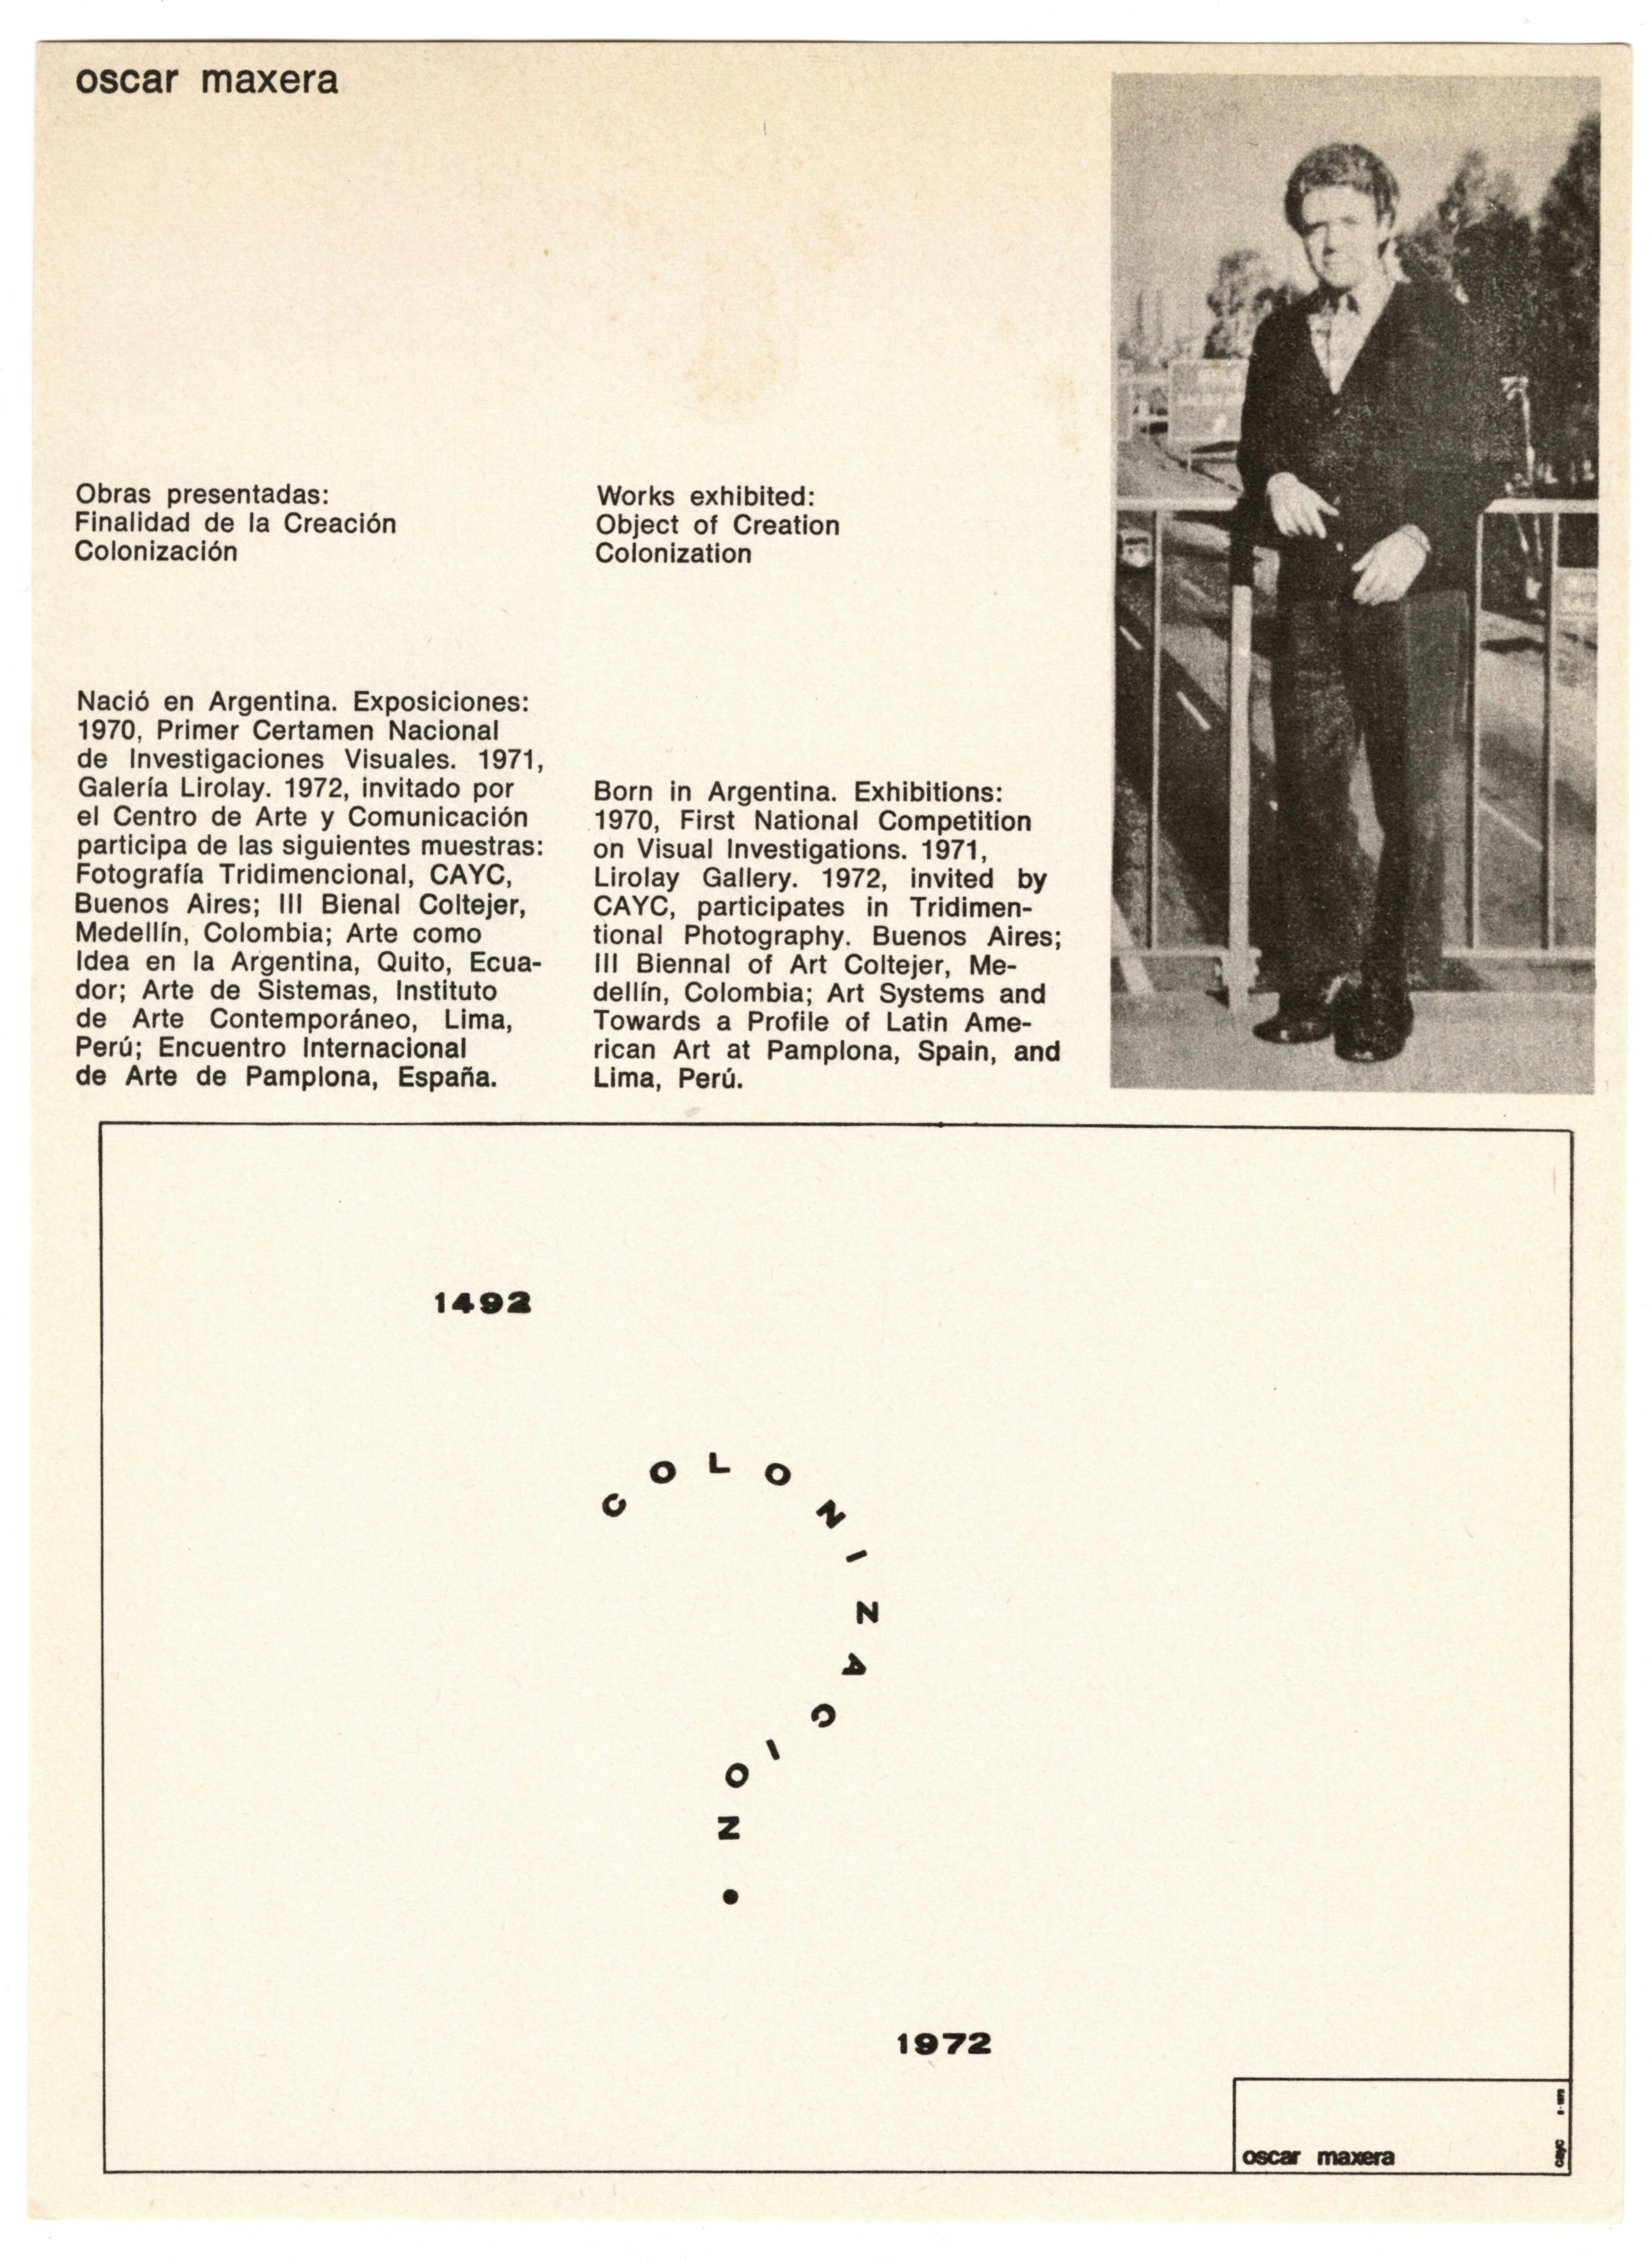 A sheet of white paper, printed with black text. On the top half of the page are printed the artist’s name, Óscar Maxera, and a list of works biography, and portrait. The list of works reads “Works exhibited: ‘Object of Creation,’ ‘Colonization.’” The biography reads: “Born in Argentina. Exhibitions: 1970, ‘First National Competition on Visual Investigations,’ 1971, Lirolay Gallery. 1972, Invited by CAYC, participates in ‘Tridimensional Photography.’ Buenos Aires: III Biennal of Art Coltejer, Medellín, Colombia; ‘Art Systems’ and ‘Towards a Profile of Latin American Art’ at Pamplona, Spain, and Lima, Perú. Appearing within a rectangular outline on the bottom half of the page are “1492,” the word “colonizacion” in the shape of a question mark, and “1972.” In a small box at the bottom right corner of the larger black rectangular outline, the artist’s name appears in small letters.